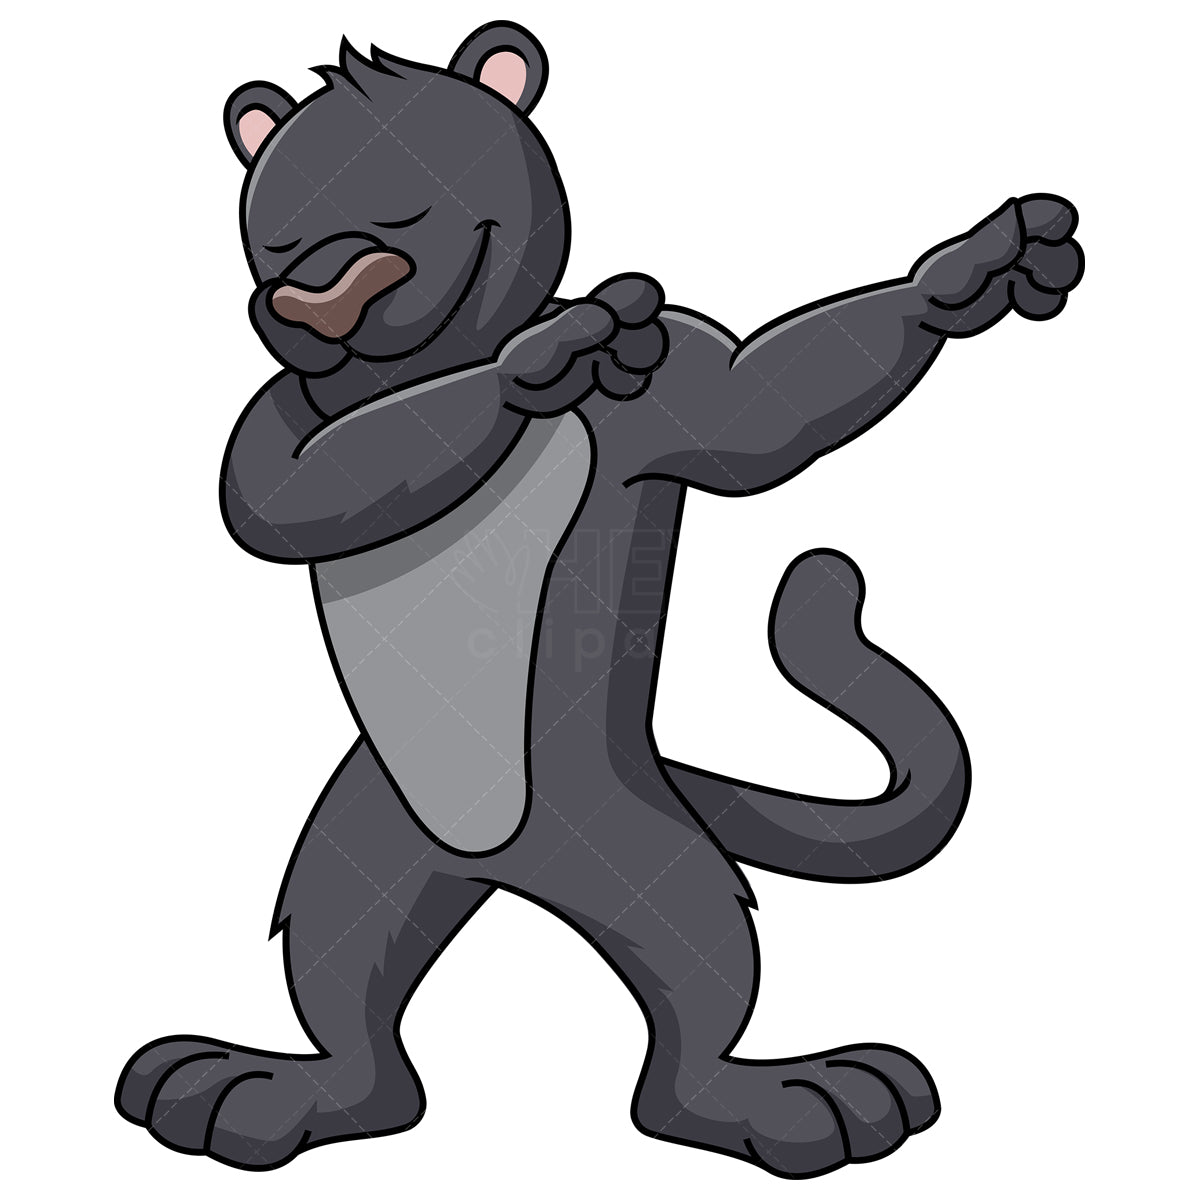 Royalty-free stock vector illustration of a dabbing black panther.